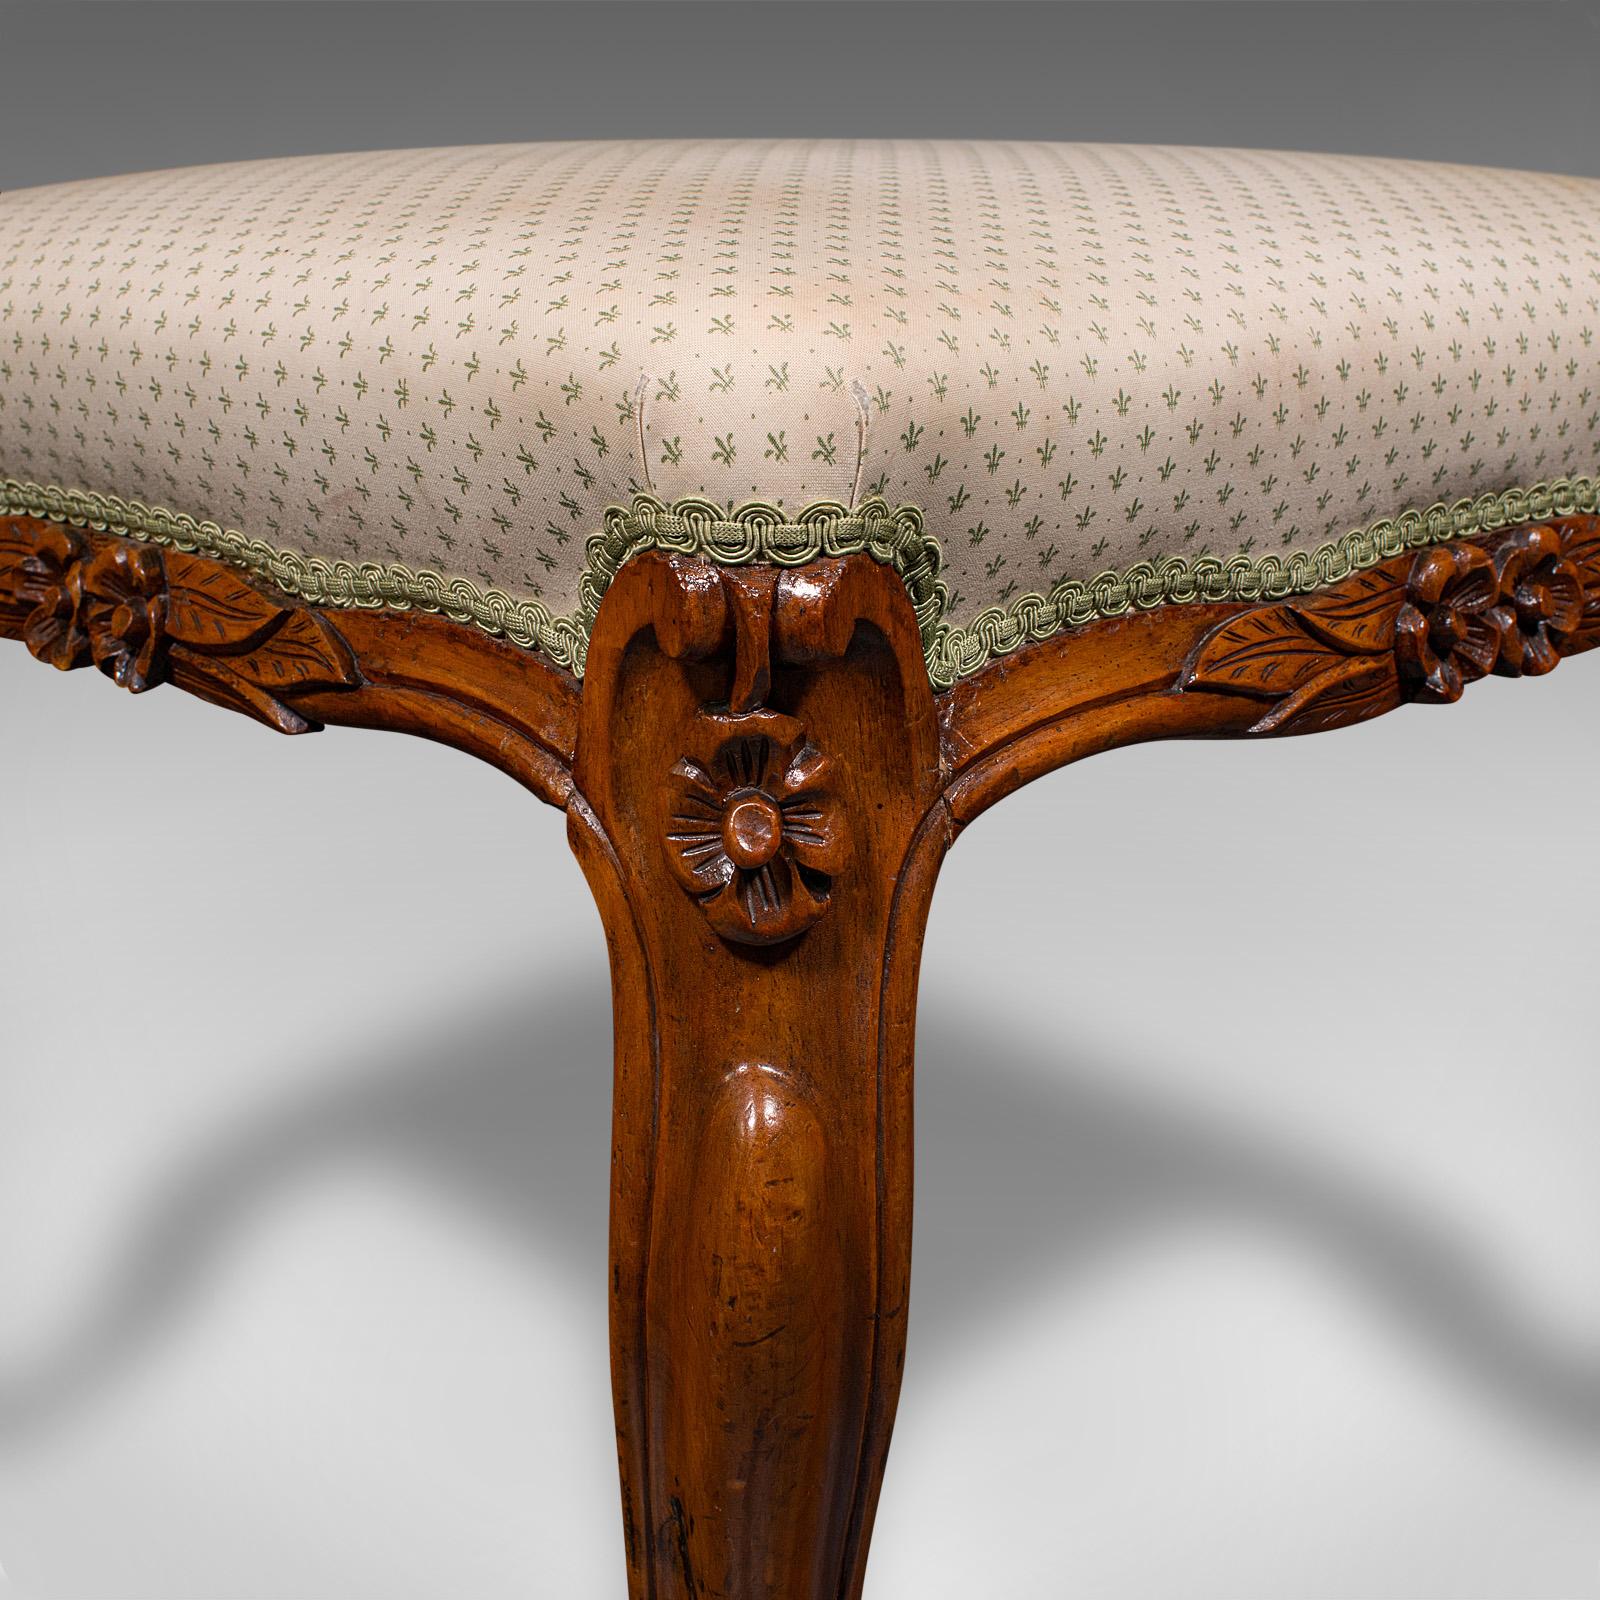 Wide Antique Dressing Stool, English, Walnut Bedroom Seat, Early Victorian, 1840 For Sale 4